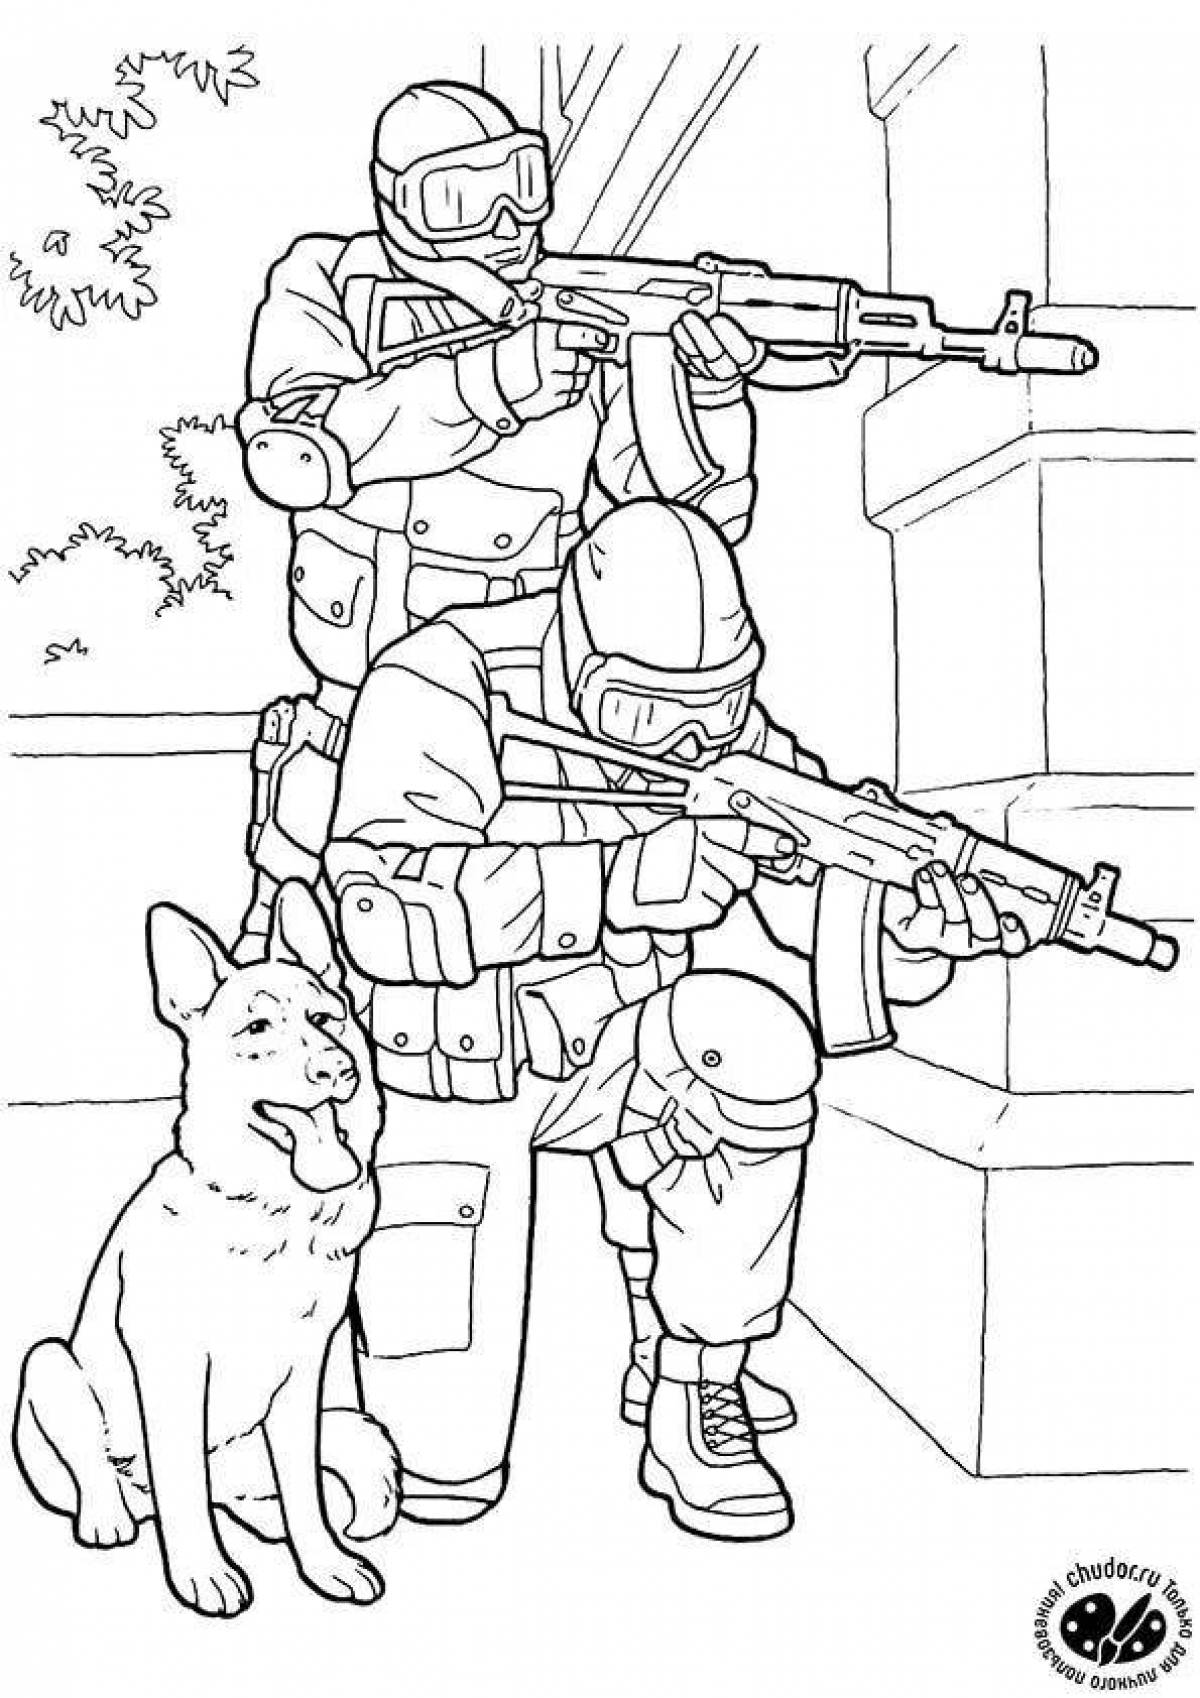 Exquisite military dog ​​coloring page